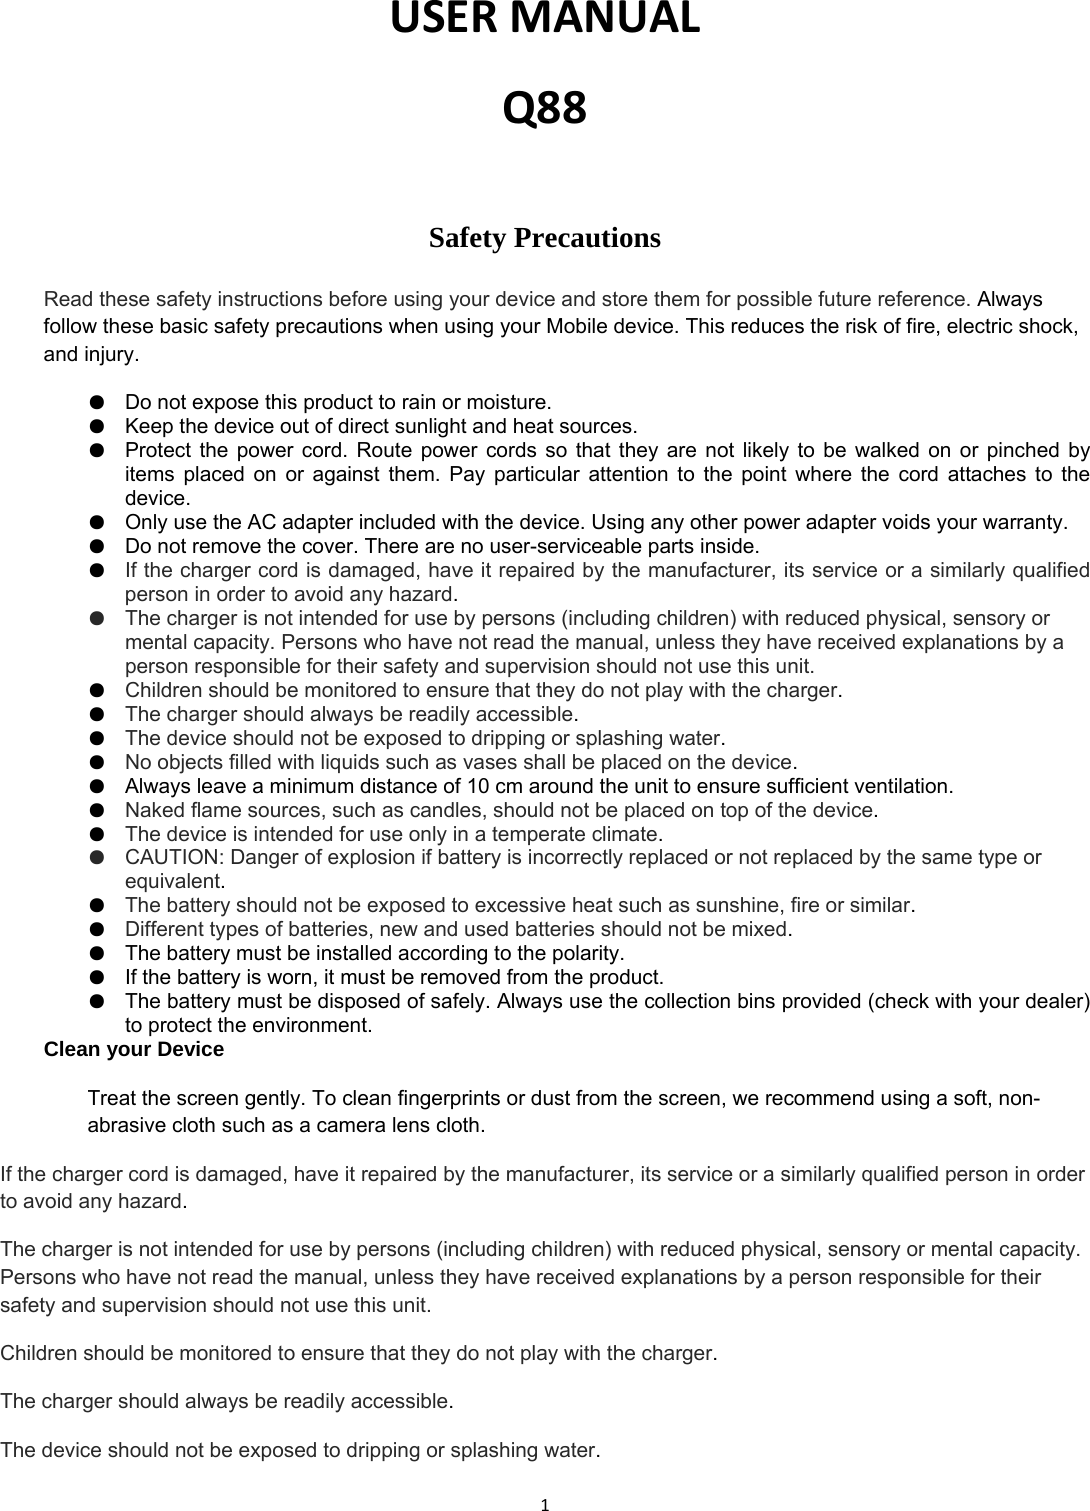 1USERMANUALQ88Safety Precautions  Read these safety instructions before using your device and store them for possible future reference. Always follow these basic safety precautions when using your Mobile device. This reduces the risk of fire, electric shock, and injury. ●  Do not expose this product to rain or moisture. ●  Keep the device out of direct sunlight and heat sources. ●  Protect the power cord. Route power cords so that they are not likely to be walked on or pinched by items placed on or against them. Pay particular attention to the point where the cord attaches to the device. ●  Only use the AC adapter included with the device. Using any other power adapter voids your warranty. ●  Do not remove the cover. There are no user-serviceable parts inside. ●  If the charger cord is damaged, have it repaired by the manufacturer, its service or a similarly qualified person in order to avoid any hazard. ●  The charger is not intended for use by persons (including children) with reduced physical, sensory or mental capacity. Persons who have not read the manual, unless they have received explanations by a person responsible for their safety and supervision should not use this unit. ●  Children should be monitored to ensure that they do not play with the charger. ●  The charger should always be readily accessible. ●  The device should not be exposed to dripping or splashing water. ●  No objects filled with liquids such as vases shall be placed on the device. ●  Always leave a minimum distance of 10 cm around the unit to ensure sufficient ventilation. ●  Naked flame sources, such as candles, should not be placed on top of the device. ●  The device is intended for use only in a temperate climate. ●  CAUTION: Danger of explosion if battery is incorrectly replaced or not replaced by the same type or equivalent. ●  The battery should not be exposed to excessive heat such as sunshine, fire or similar. ●  Different types of batteries, new and used batteries should not be mixed. ●  The battery must be installed according to the polarity. ●  If the battery is worn, it must be removed from the product. ●  The battery must be disposed of safely. Always use the collection bins provided (check with your dealer) to protect the environment. Clean your Device Treat the screen gently. To clean fingerprints or dust from the screen, we recommend using a soft, non-abrasive cloth such as a camera lens cloth. If the charger cord is damaged, have it repaired by the manufacturer, its service or a similarly qualified person in order to avoid any hazard. The charger is not intended for use by persons (including children) with reduced physical, sensory or mental capacity. Persons who have not read the manual, unless they have received explanations by a person responsible for their safety and supervision should not use this unit. Children should be monitored to ensure that they do not play with the charger. The charger should always be readily accessible. The device should not be exposed to dripping or splashing water. 